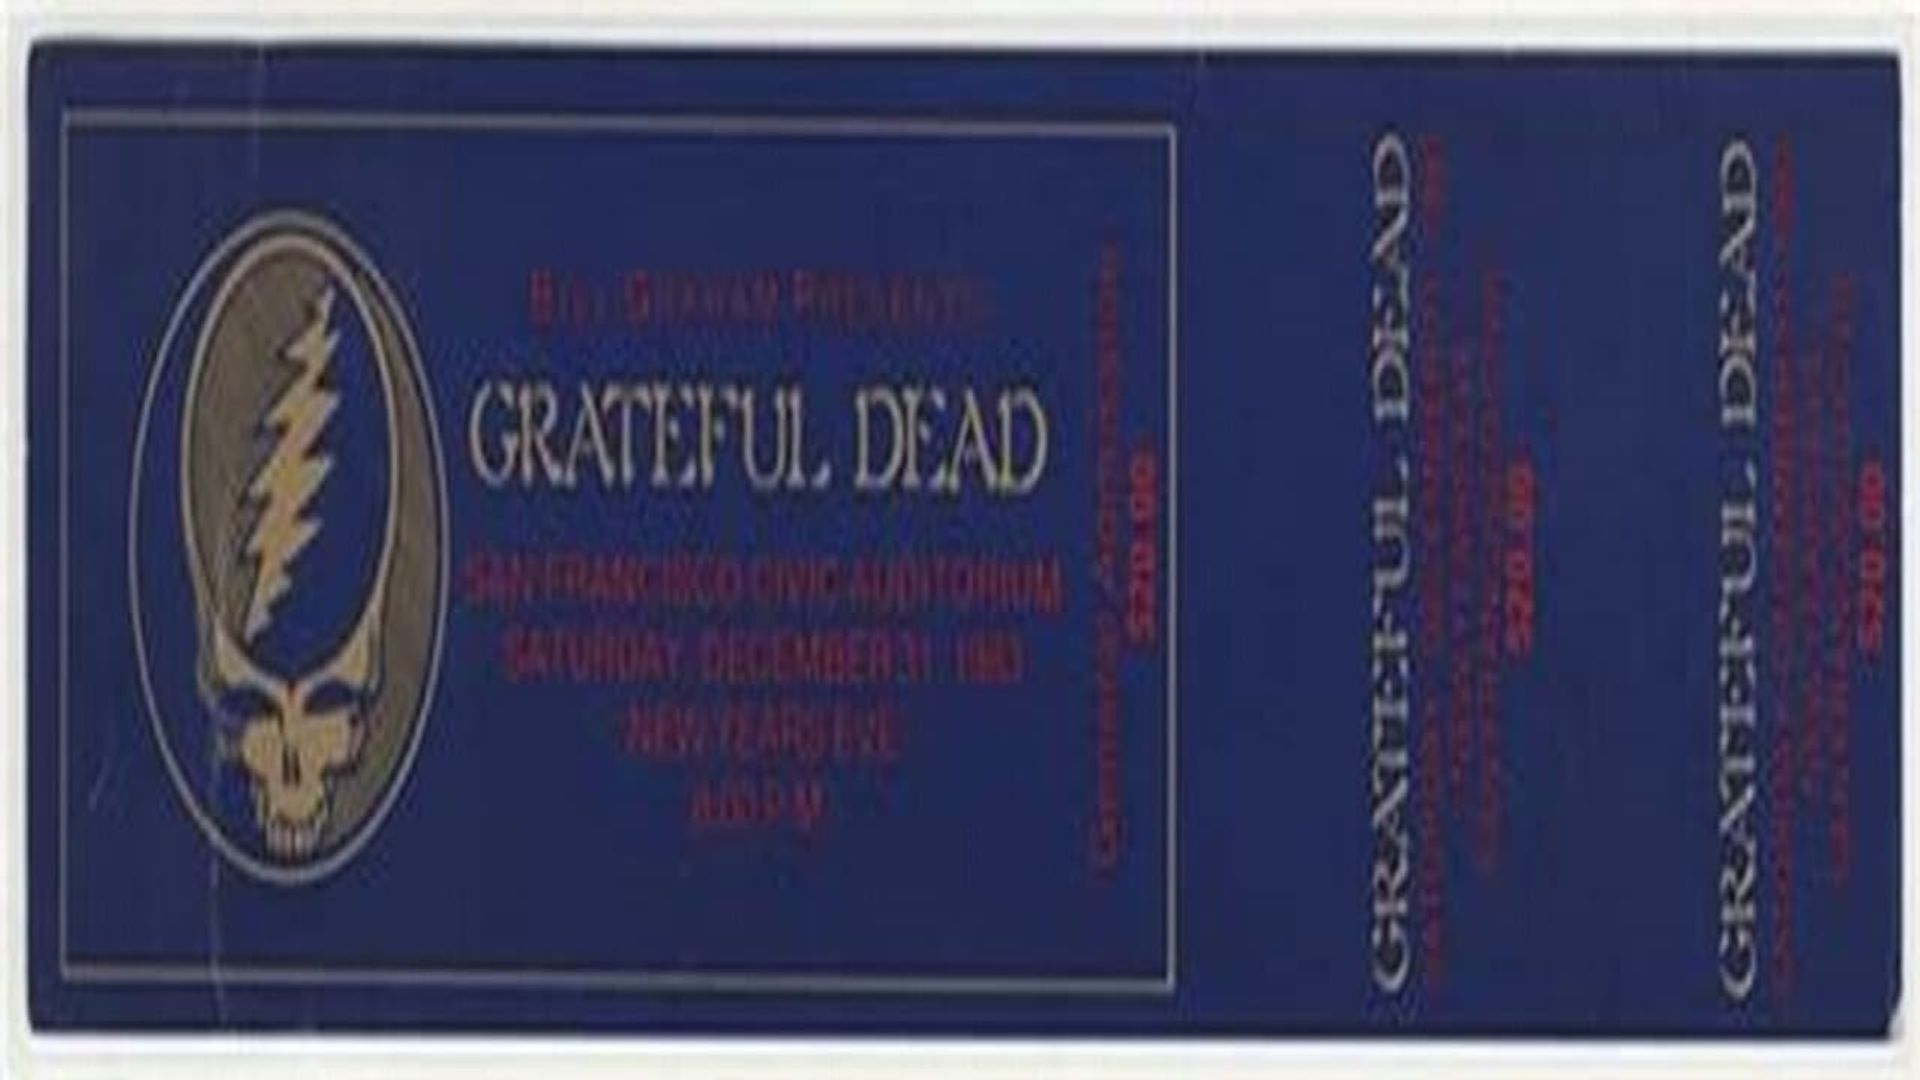 Grateful Dead: Ticket to New Year's Eve Concert background